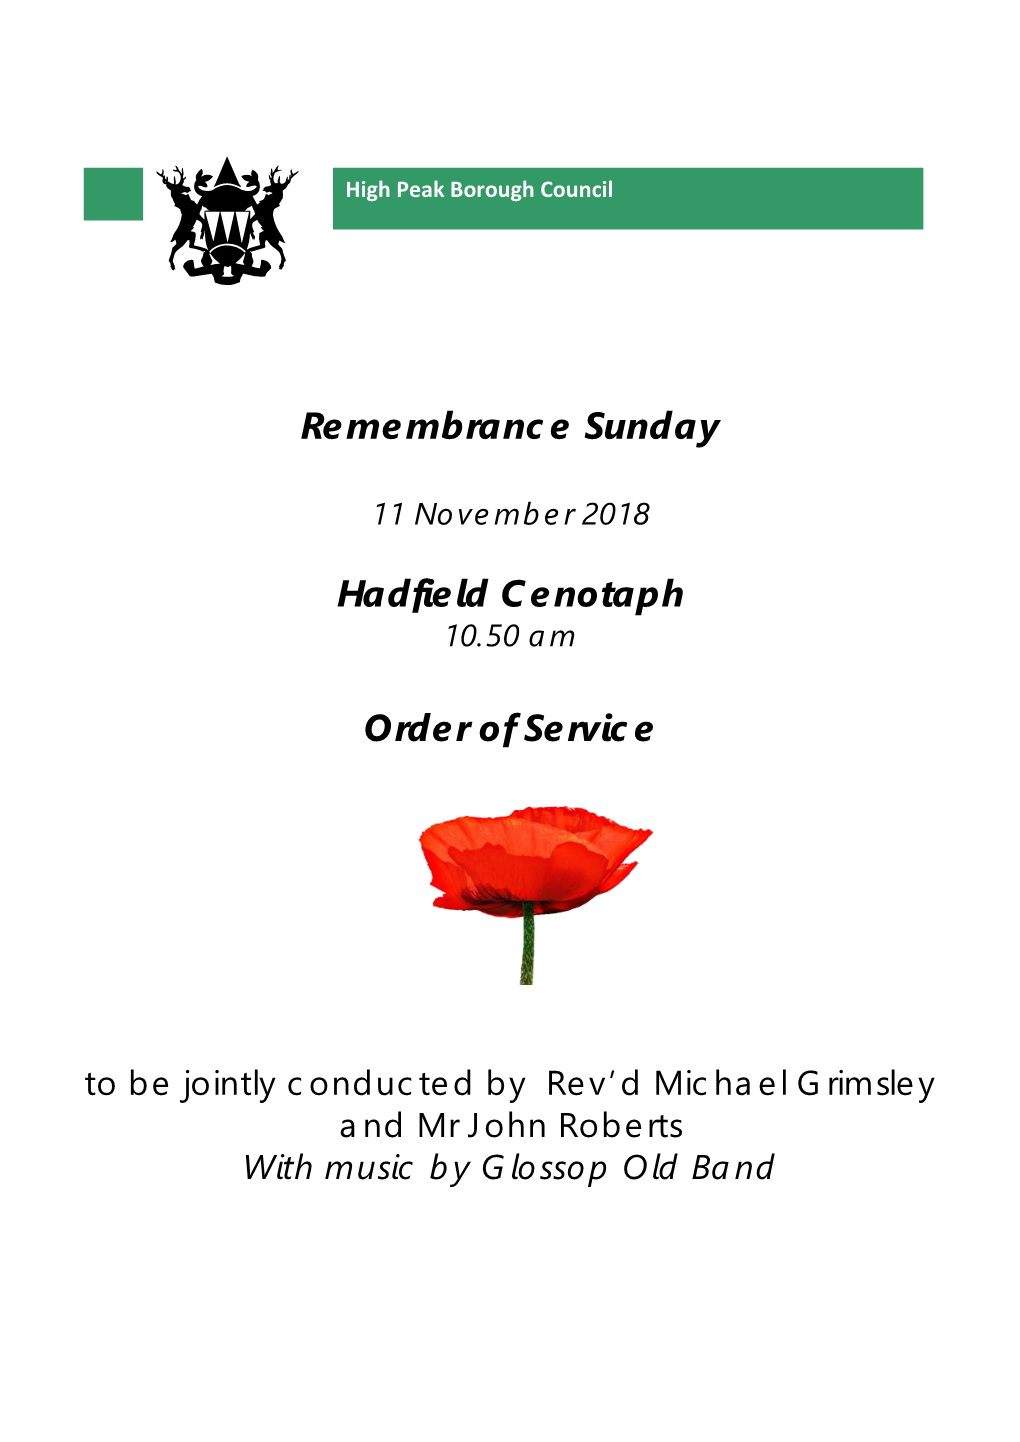 Remembrance Sunday Hadfield Cenotaph Order of Service